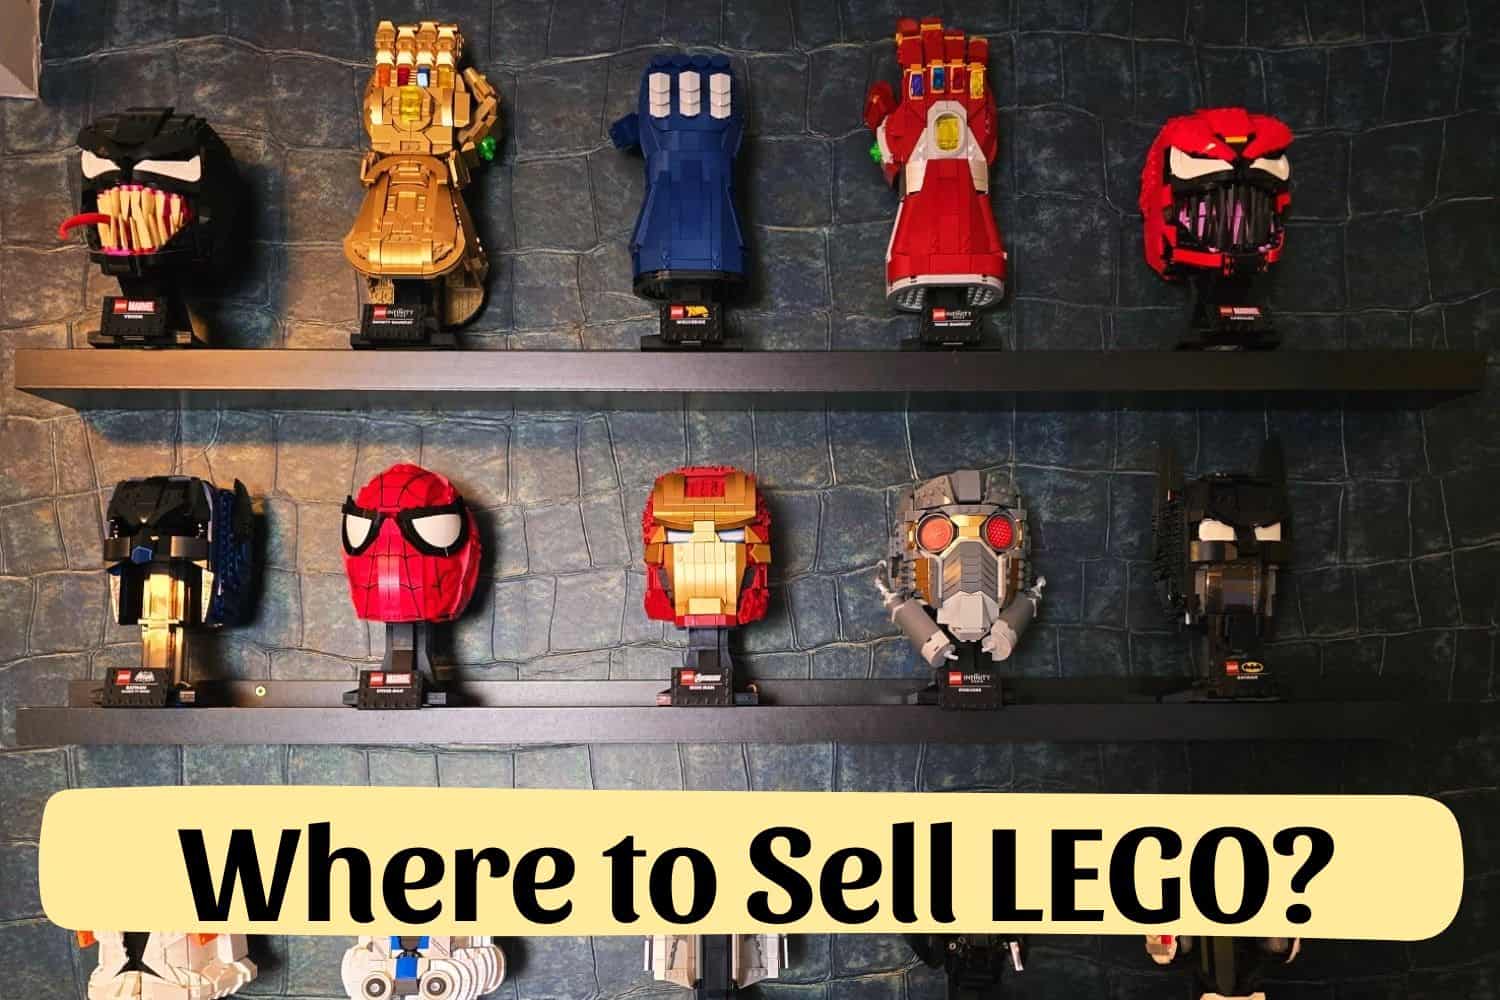 Where to Sell LEGO?